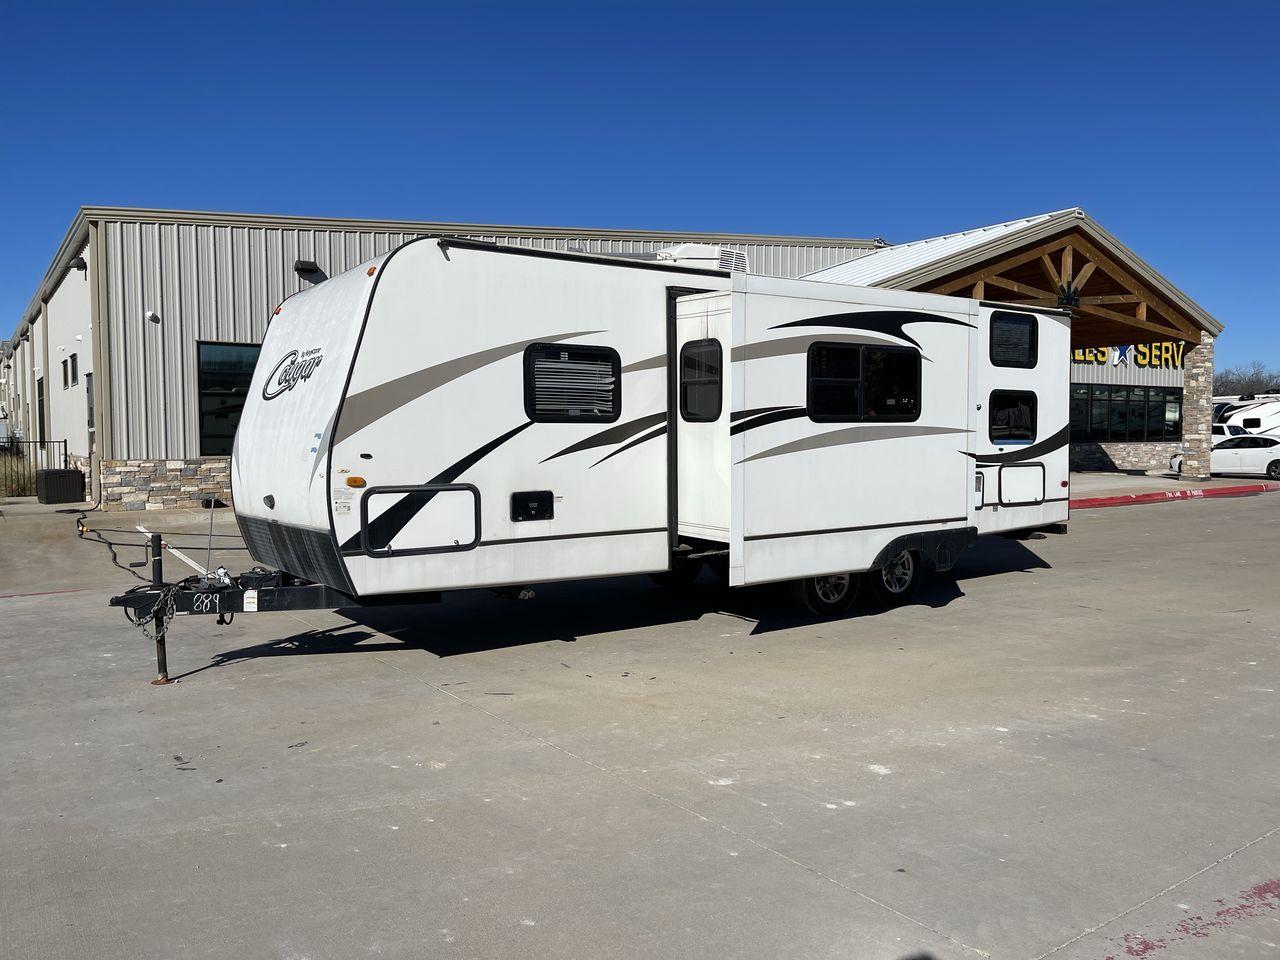 2014 WHITE KEYSTONE COUGAR MDL 260RB (4YDT26027EV) , Length: 29.67 ft. | Dry Weight: 5,065 lbs. | Slides: 1 transmission, located at 4319 N Main Street, Cleburne, TX, 76033, (817) 221-0660, 32.435829, -97.384178 - The 2014 Keystone Cougar Model 260RB travel trailer offers the ideal fusion of elegance and utility. With its roomy and welcoming interior, this well-designed RV is a great option for both long trips and weekend excursions. This travel trailer has a length of 29.8 ft and weighs 5,065 lbs. It is s - Photo #44